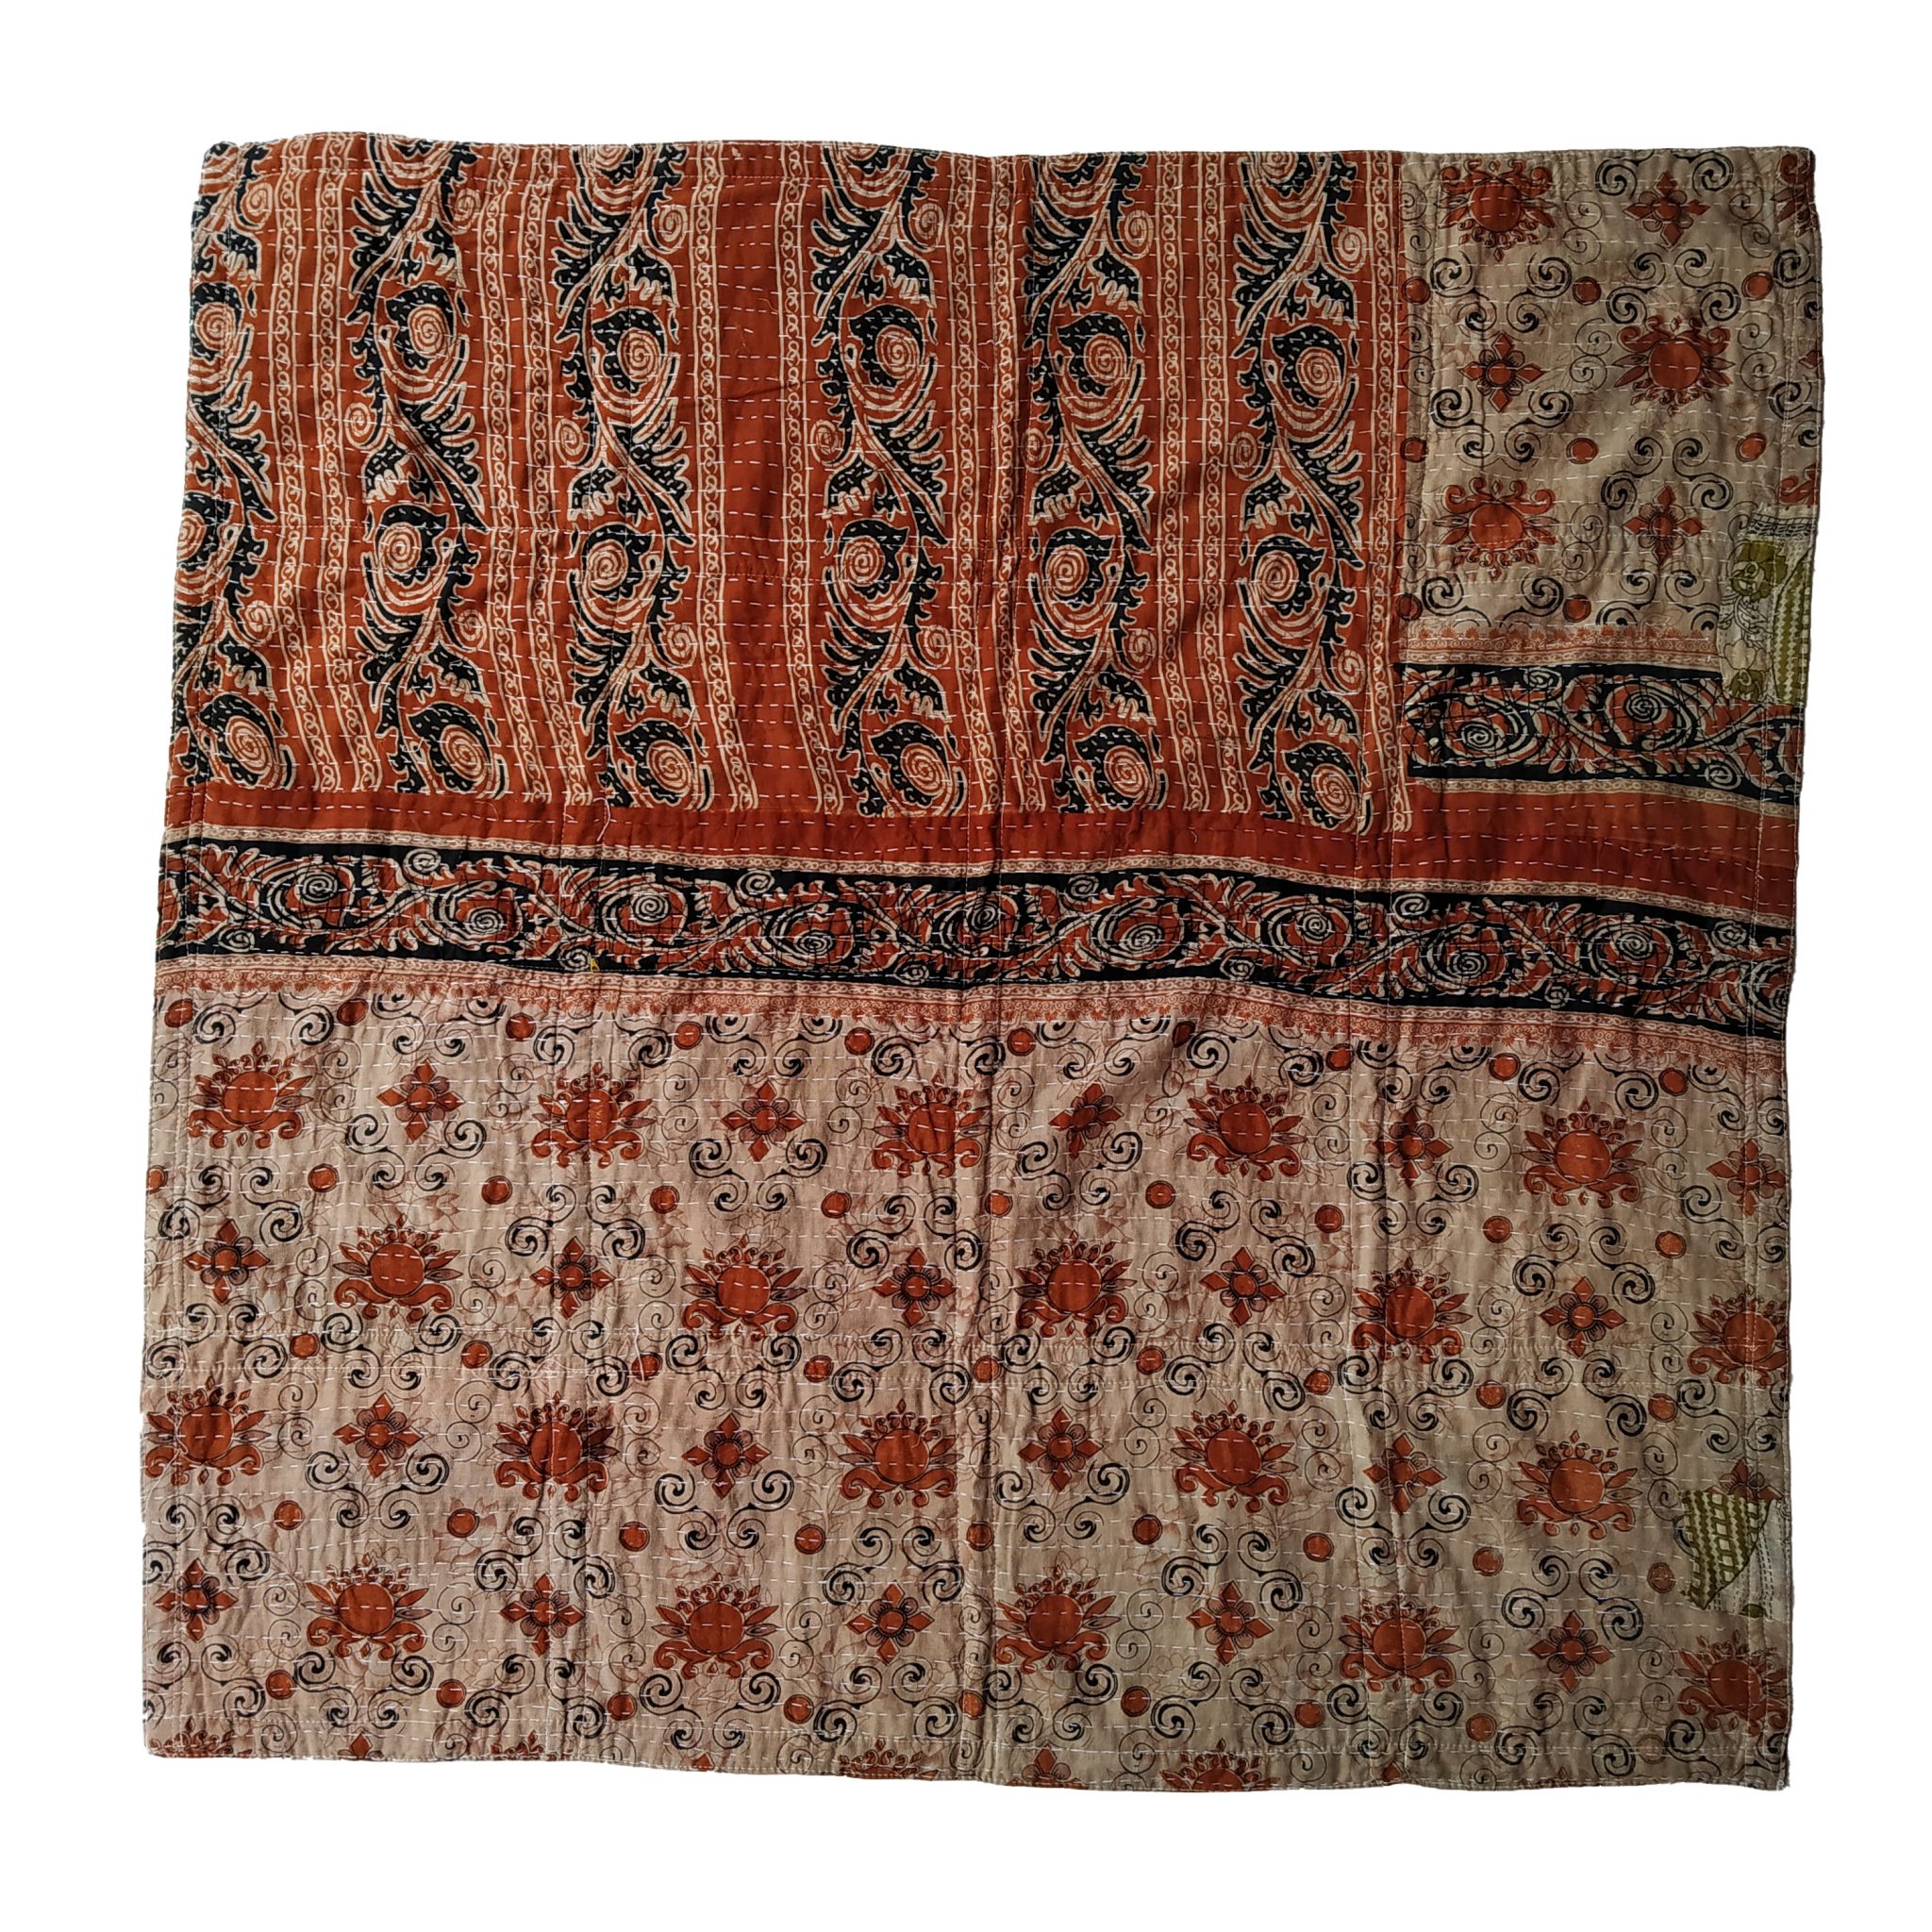 Handmade Indian Kantha Baby Quilt - Vintage Kantha Quilts, Throw ...